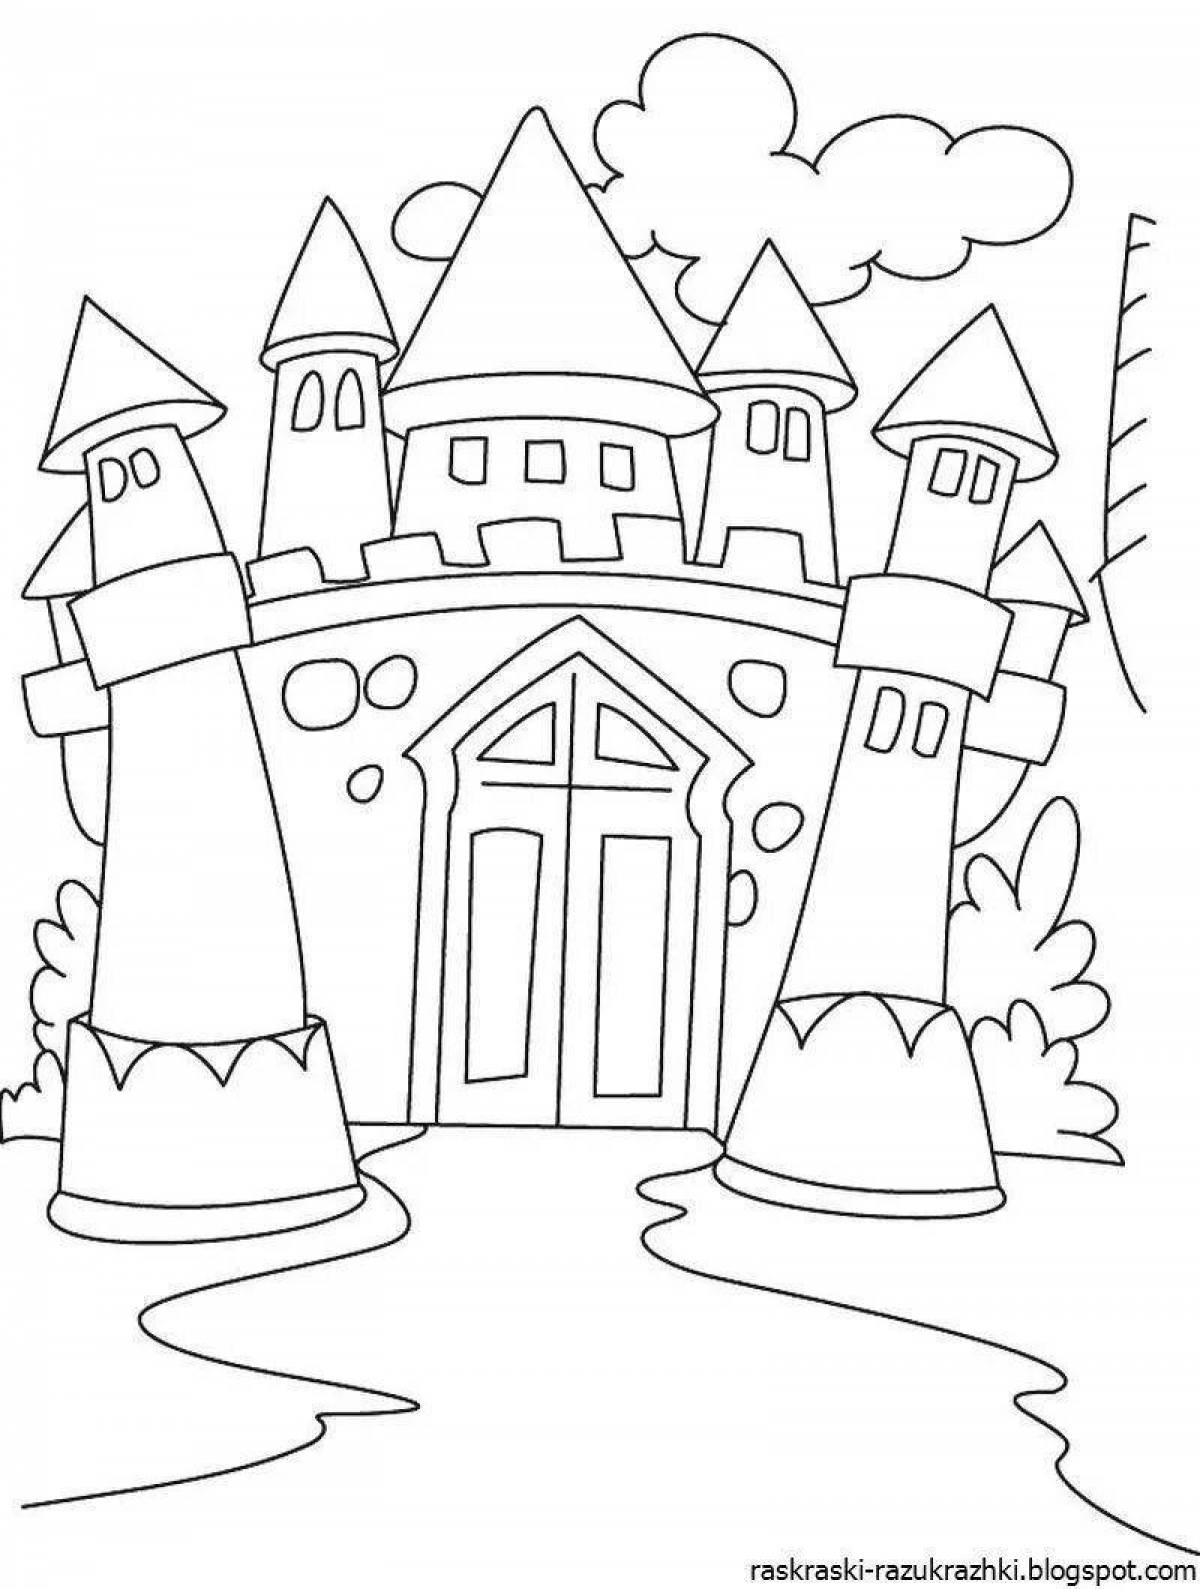 Exquisite coloring book for girls with houses and castles